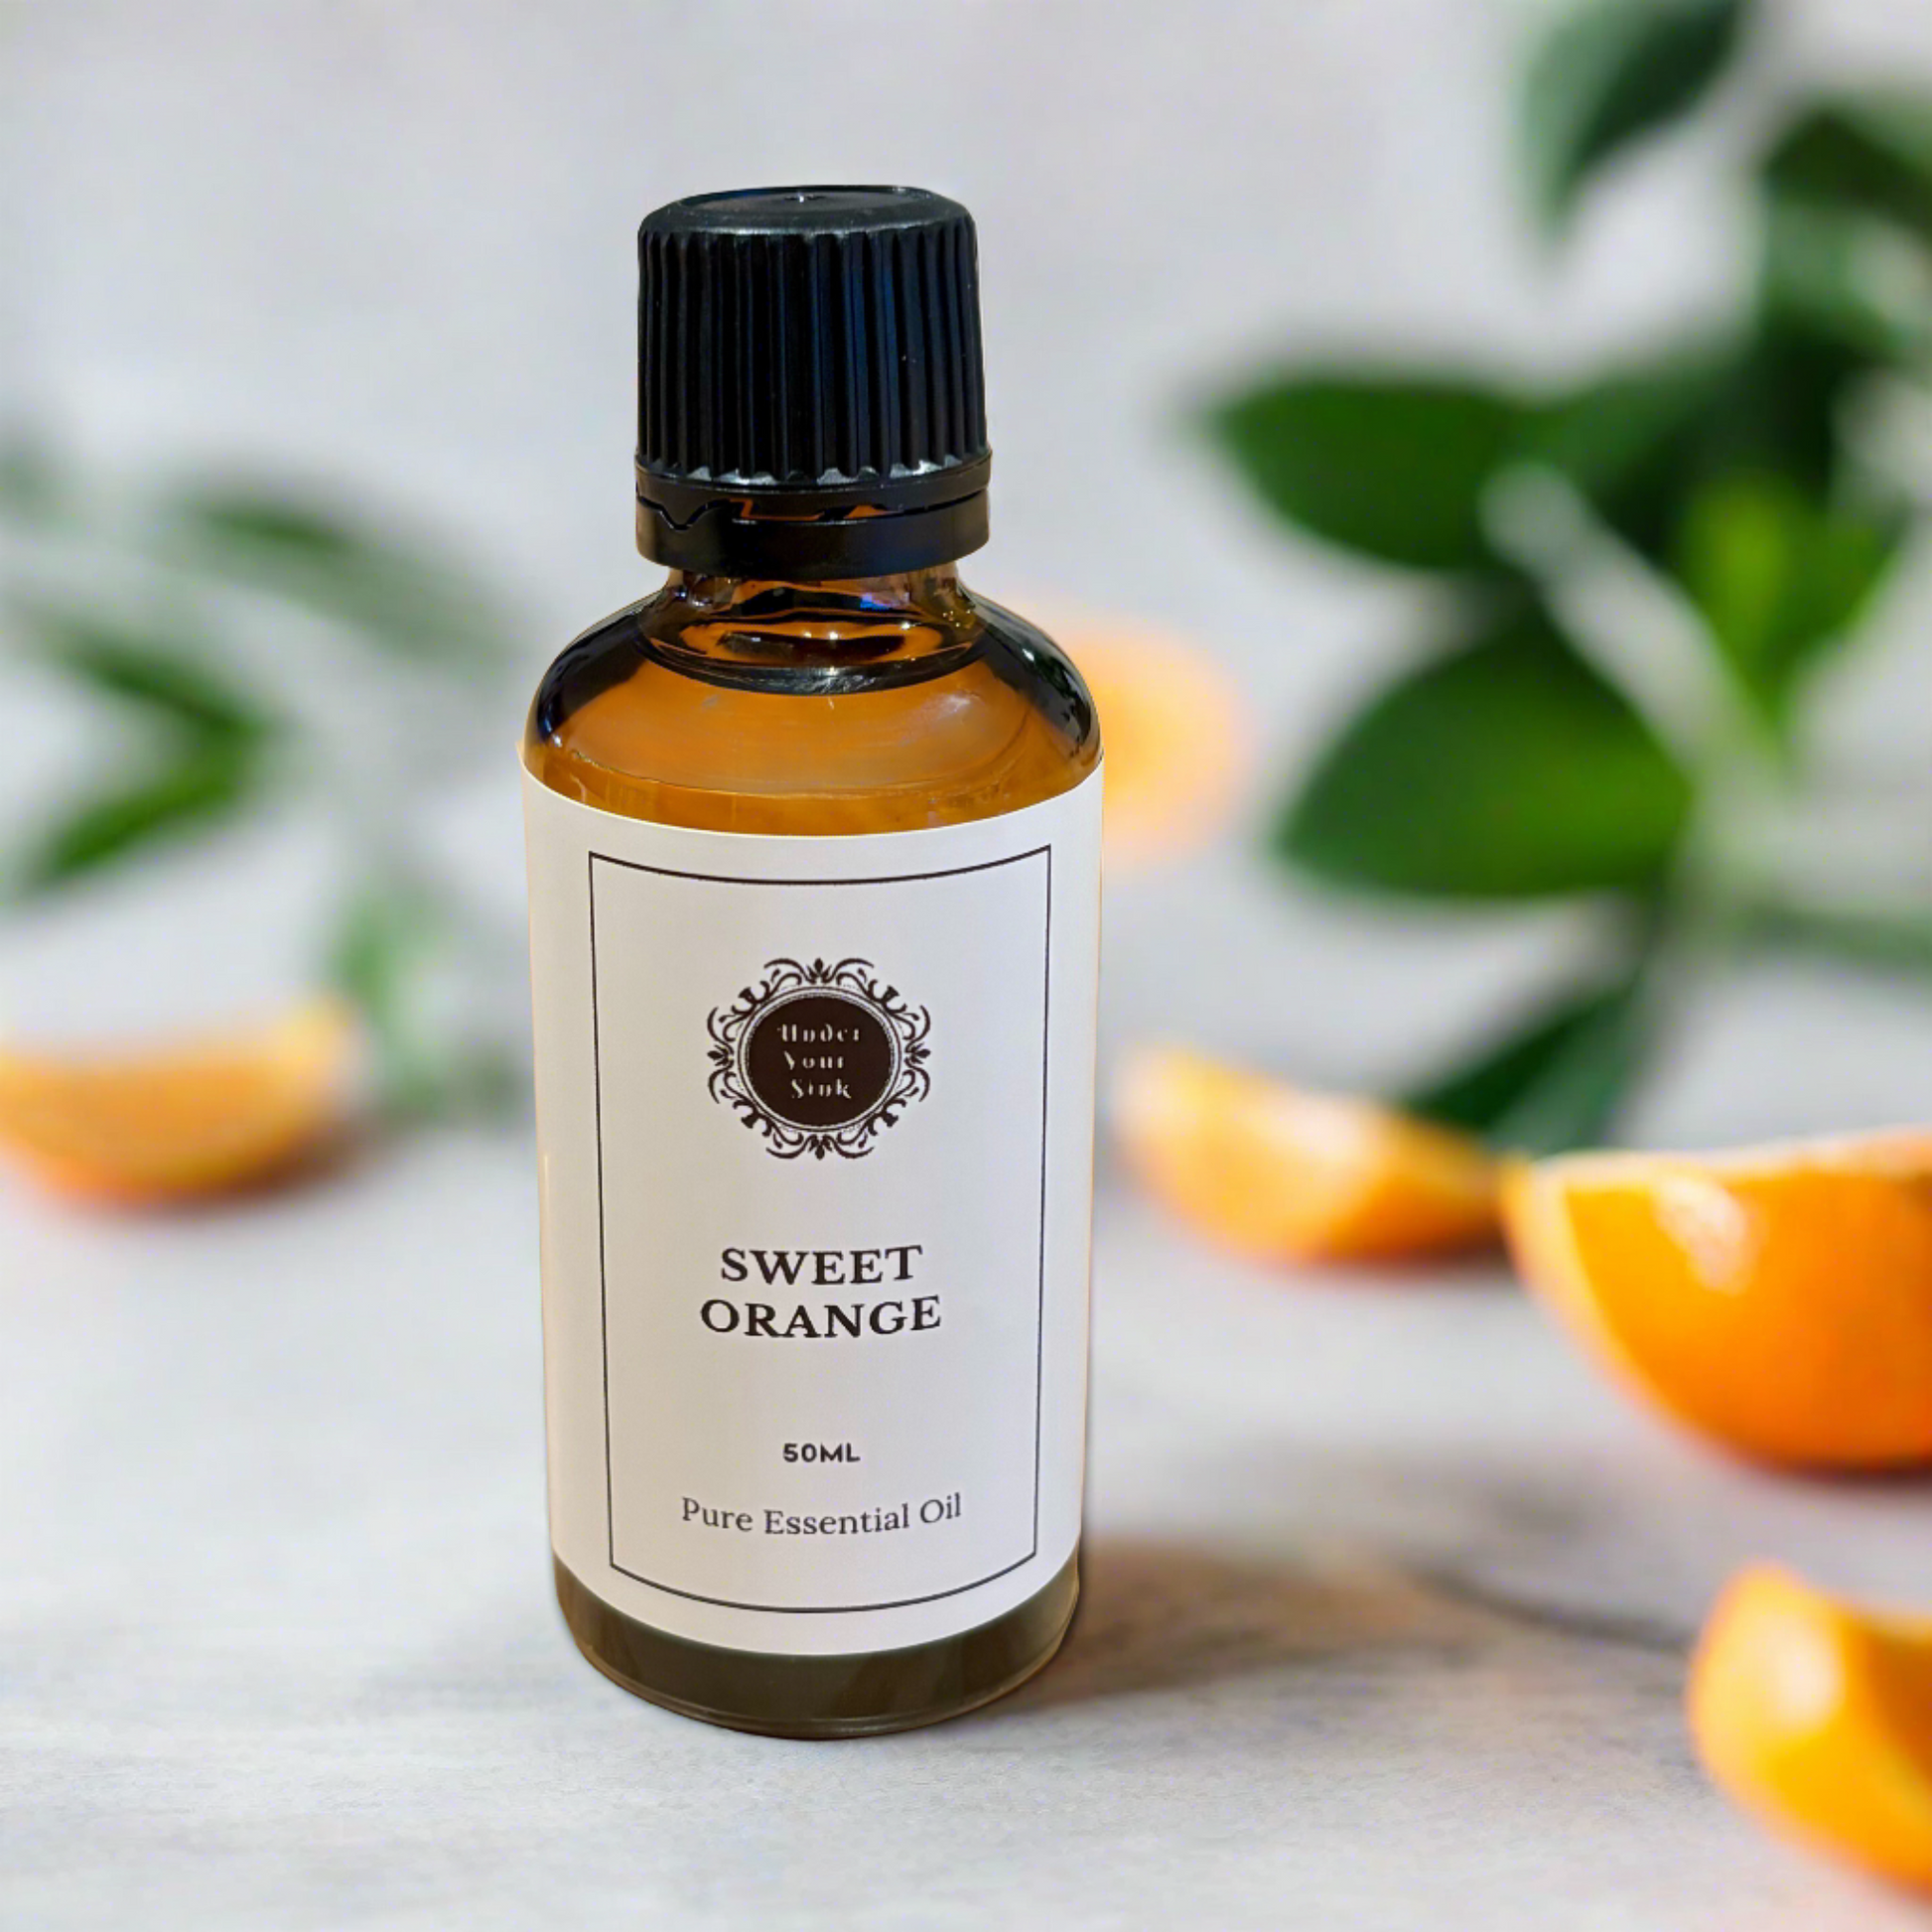 Amber glass essential oil bottle with white label with Under Your Sink logo and description SWEET ORANGE pre essential oil. Has blurred images of oranges in background